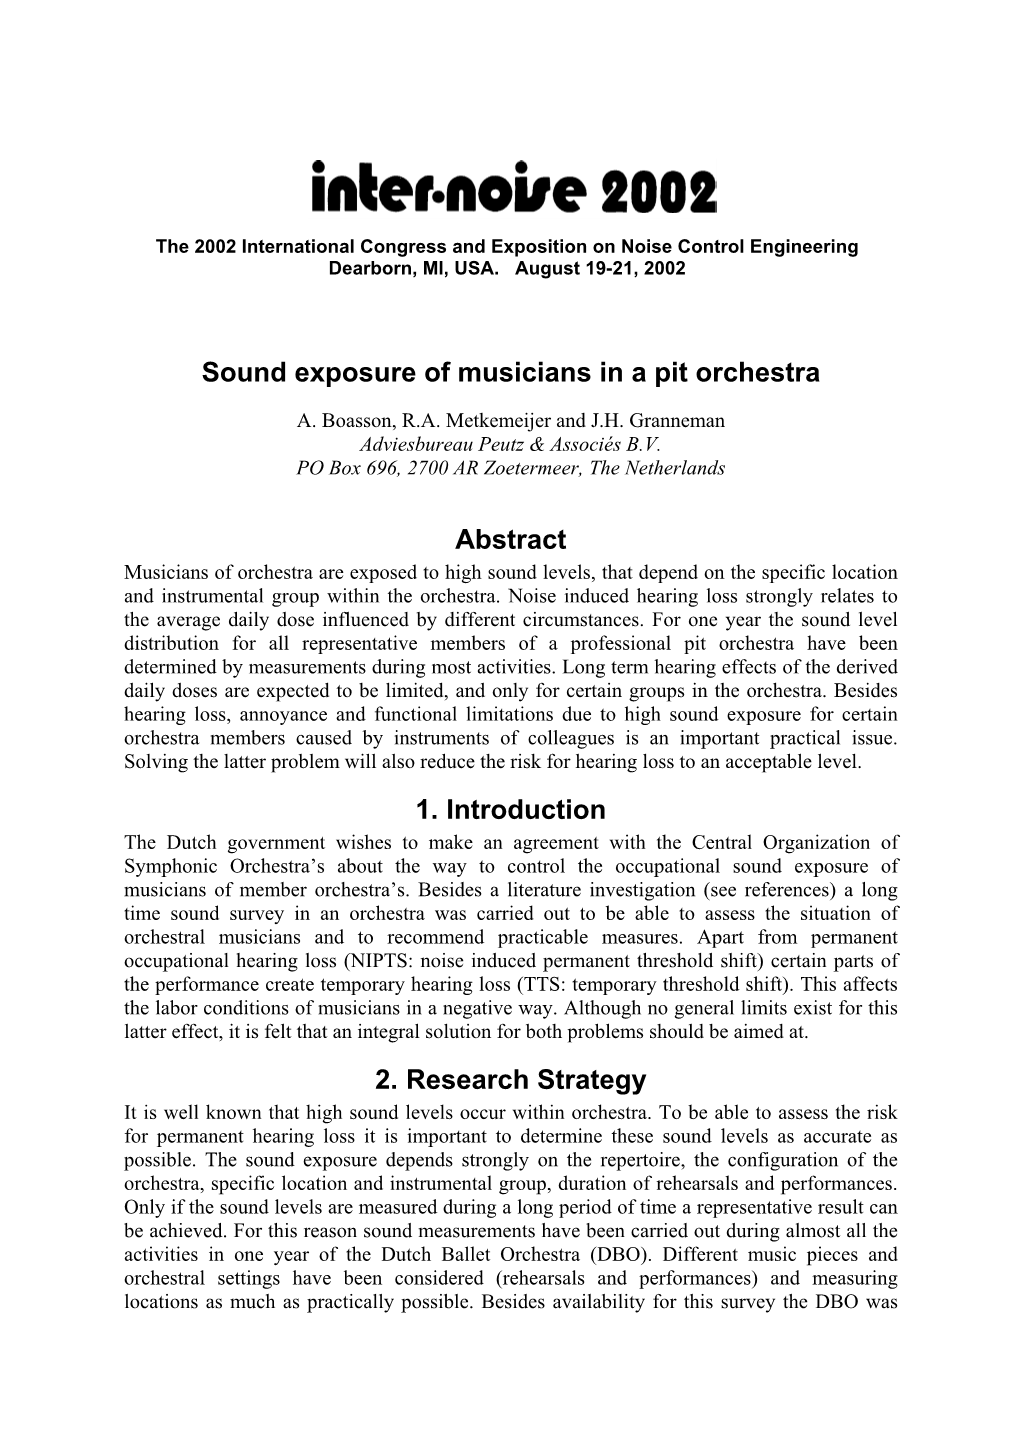 Sound Exposure of Musicians in a Pit Orchestra